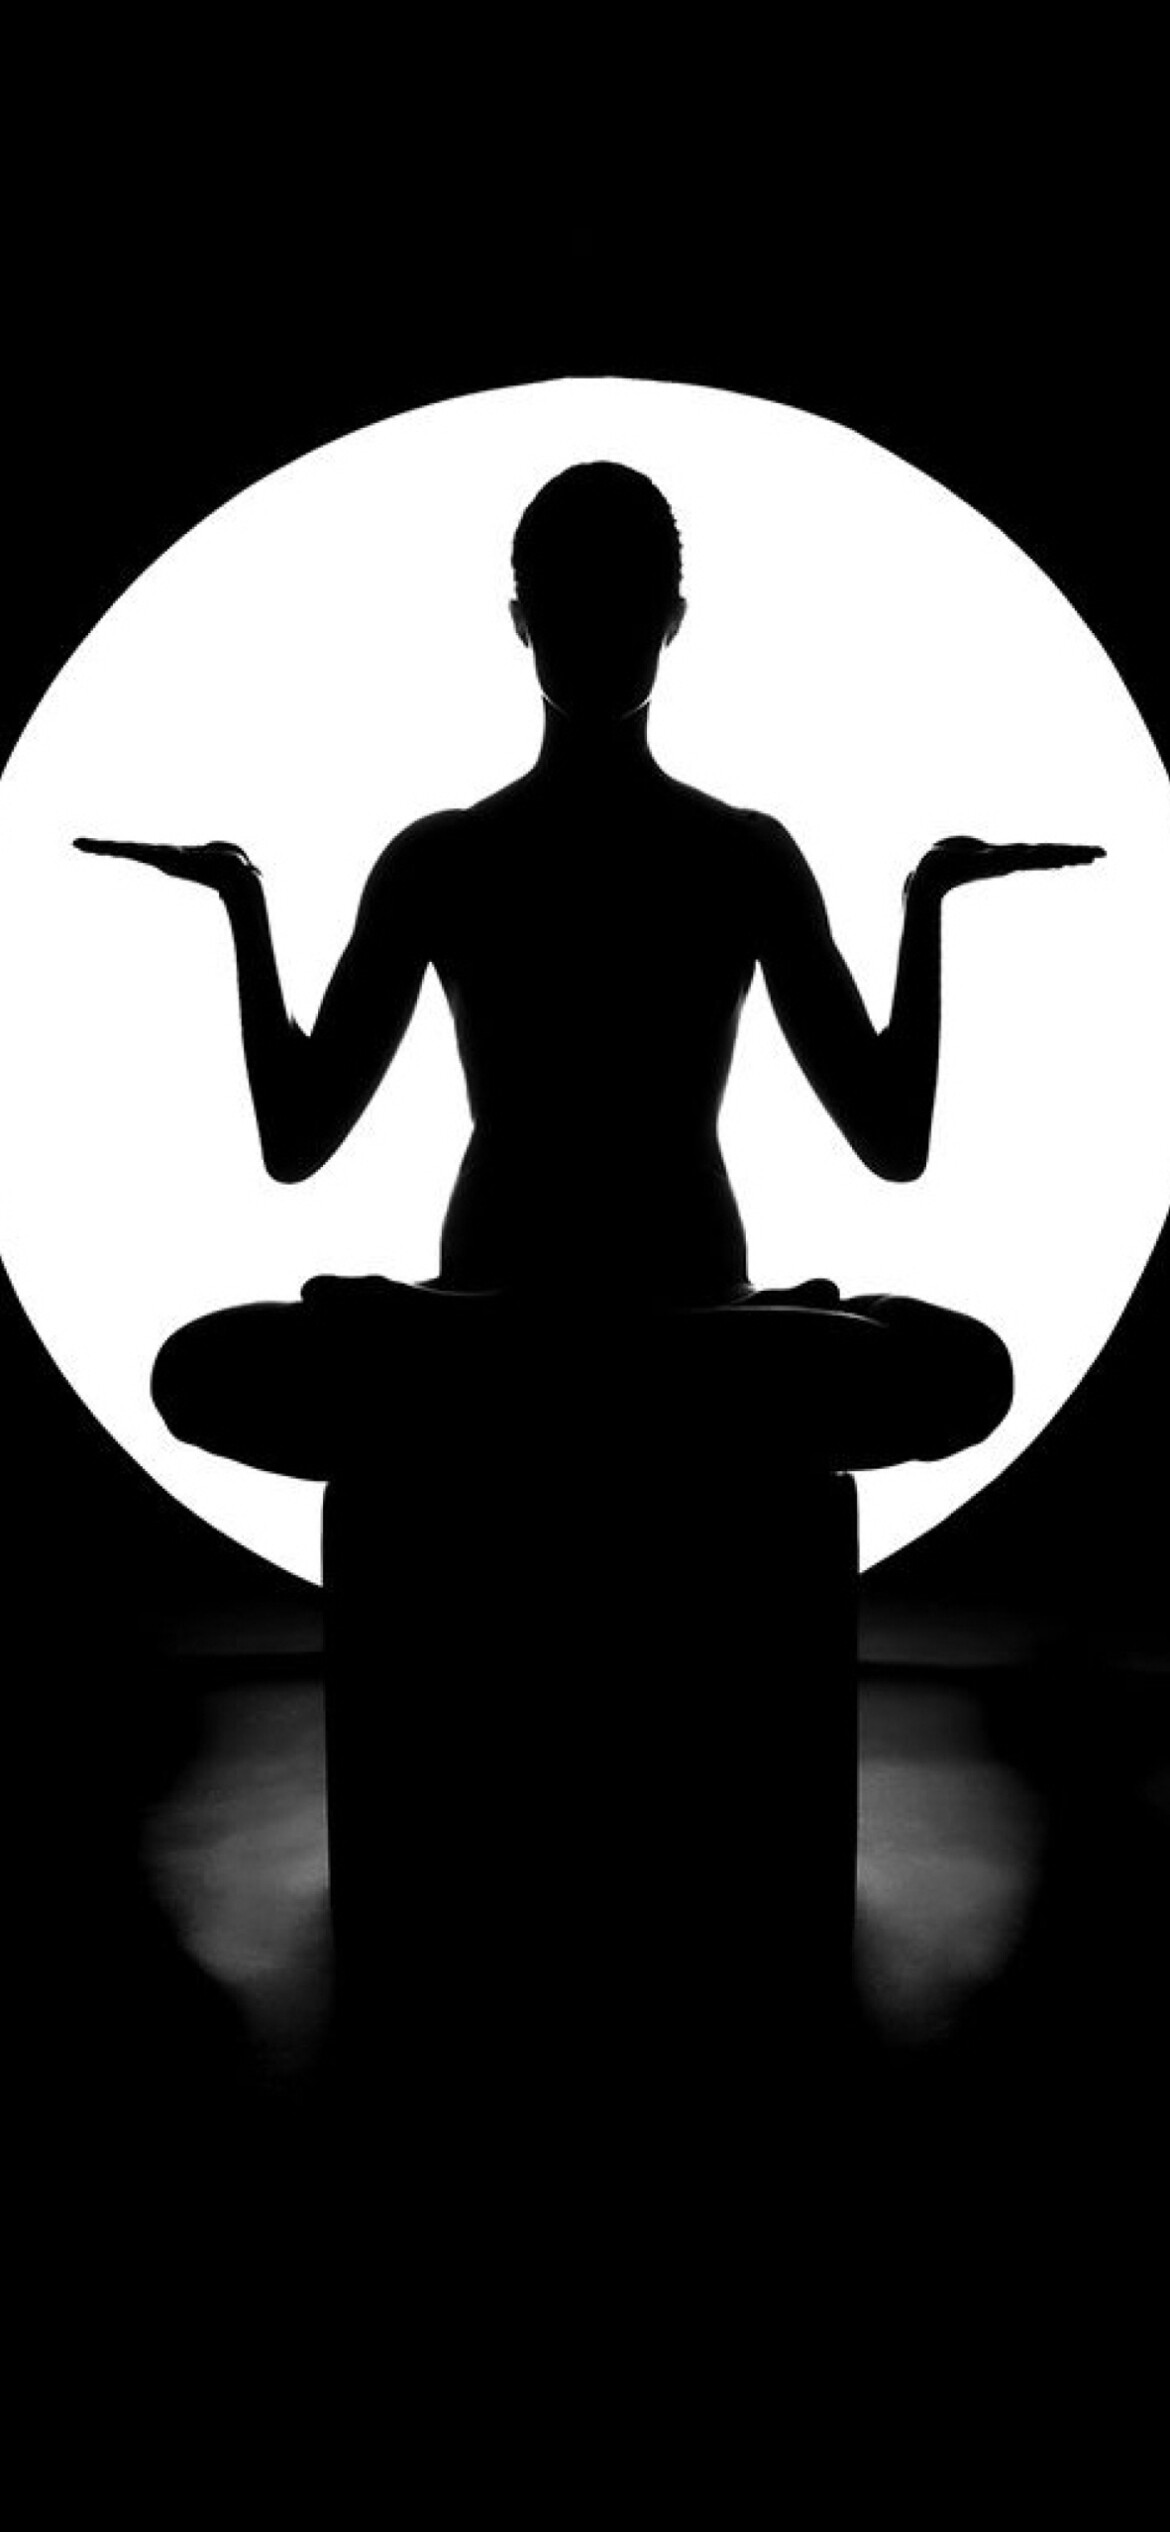 Yoga: Specific exercises, Focusing on posture and breathing techniques, Monochrome. 1170x2540 HD Background.